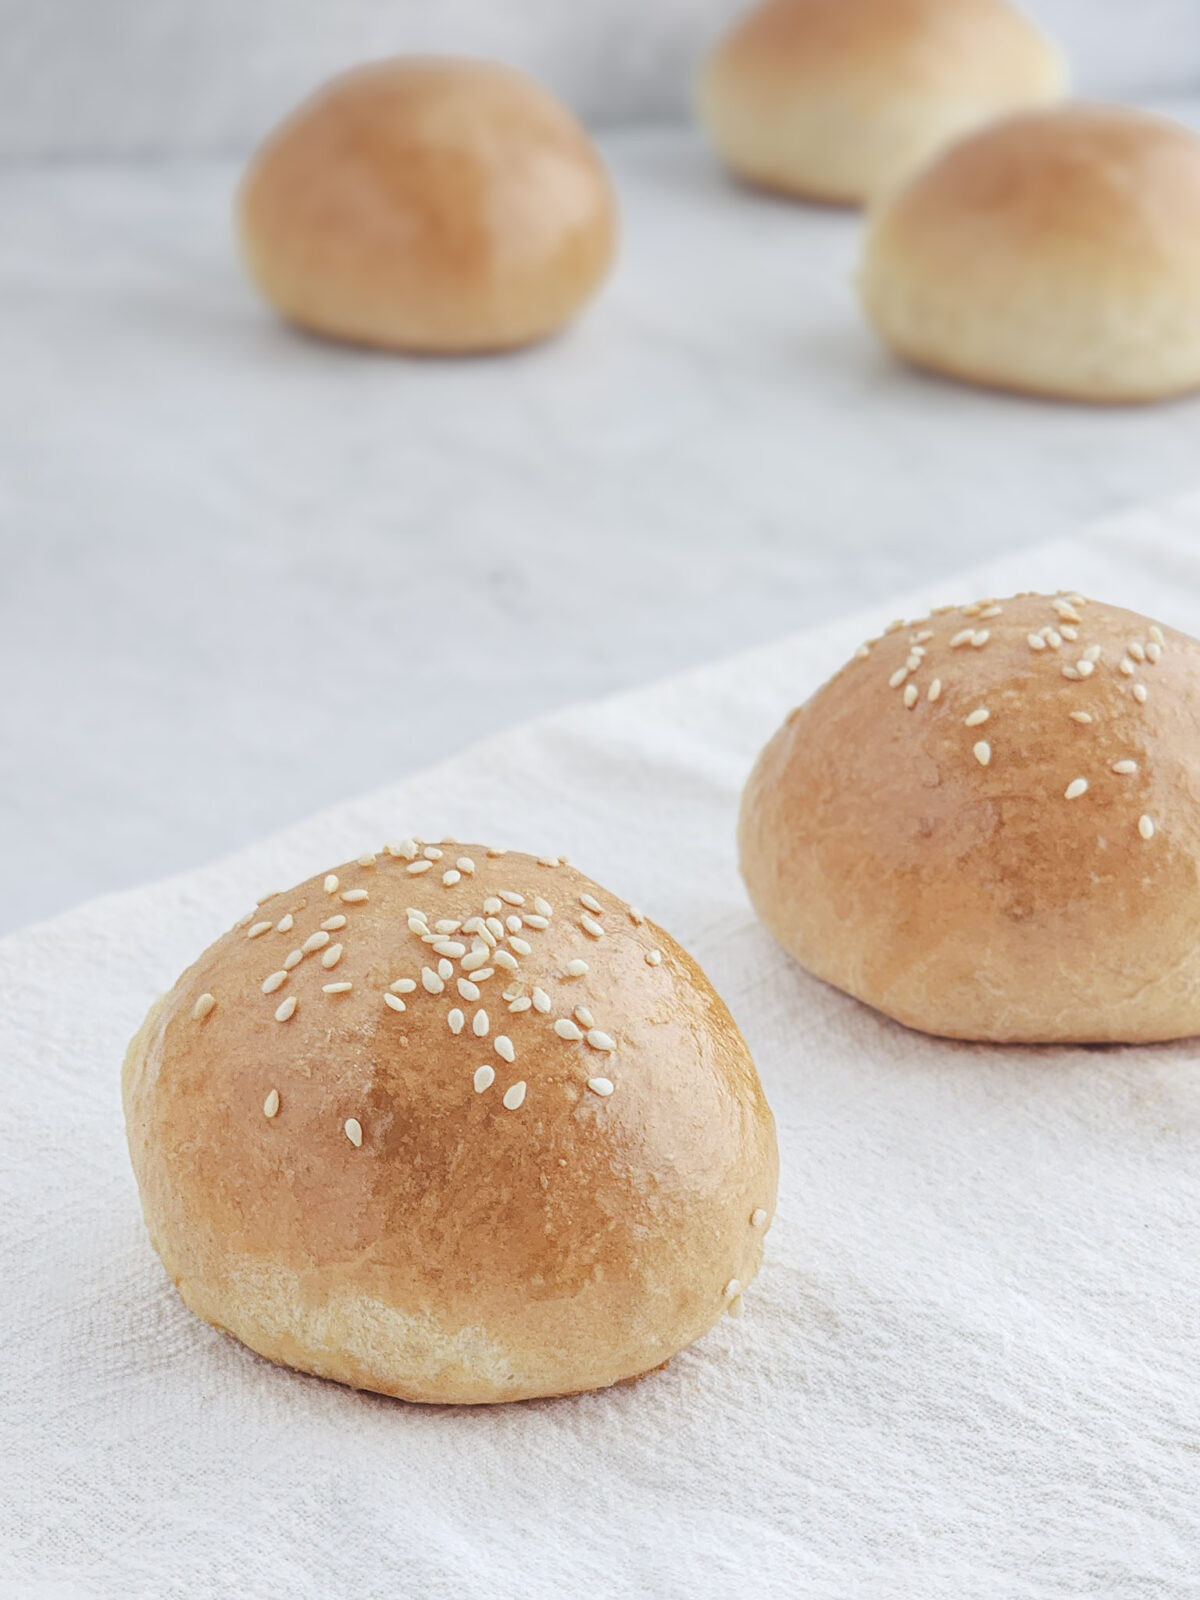 Homemade Brioche Buns with Sesame Seed Topping